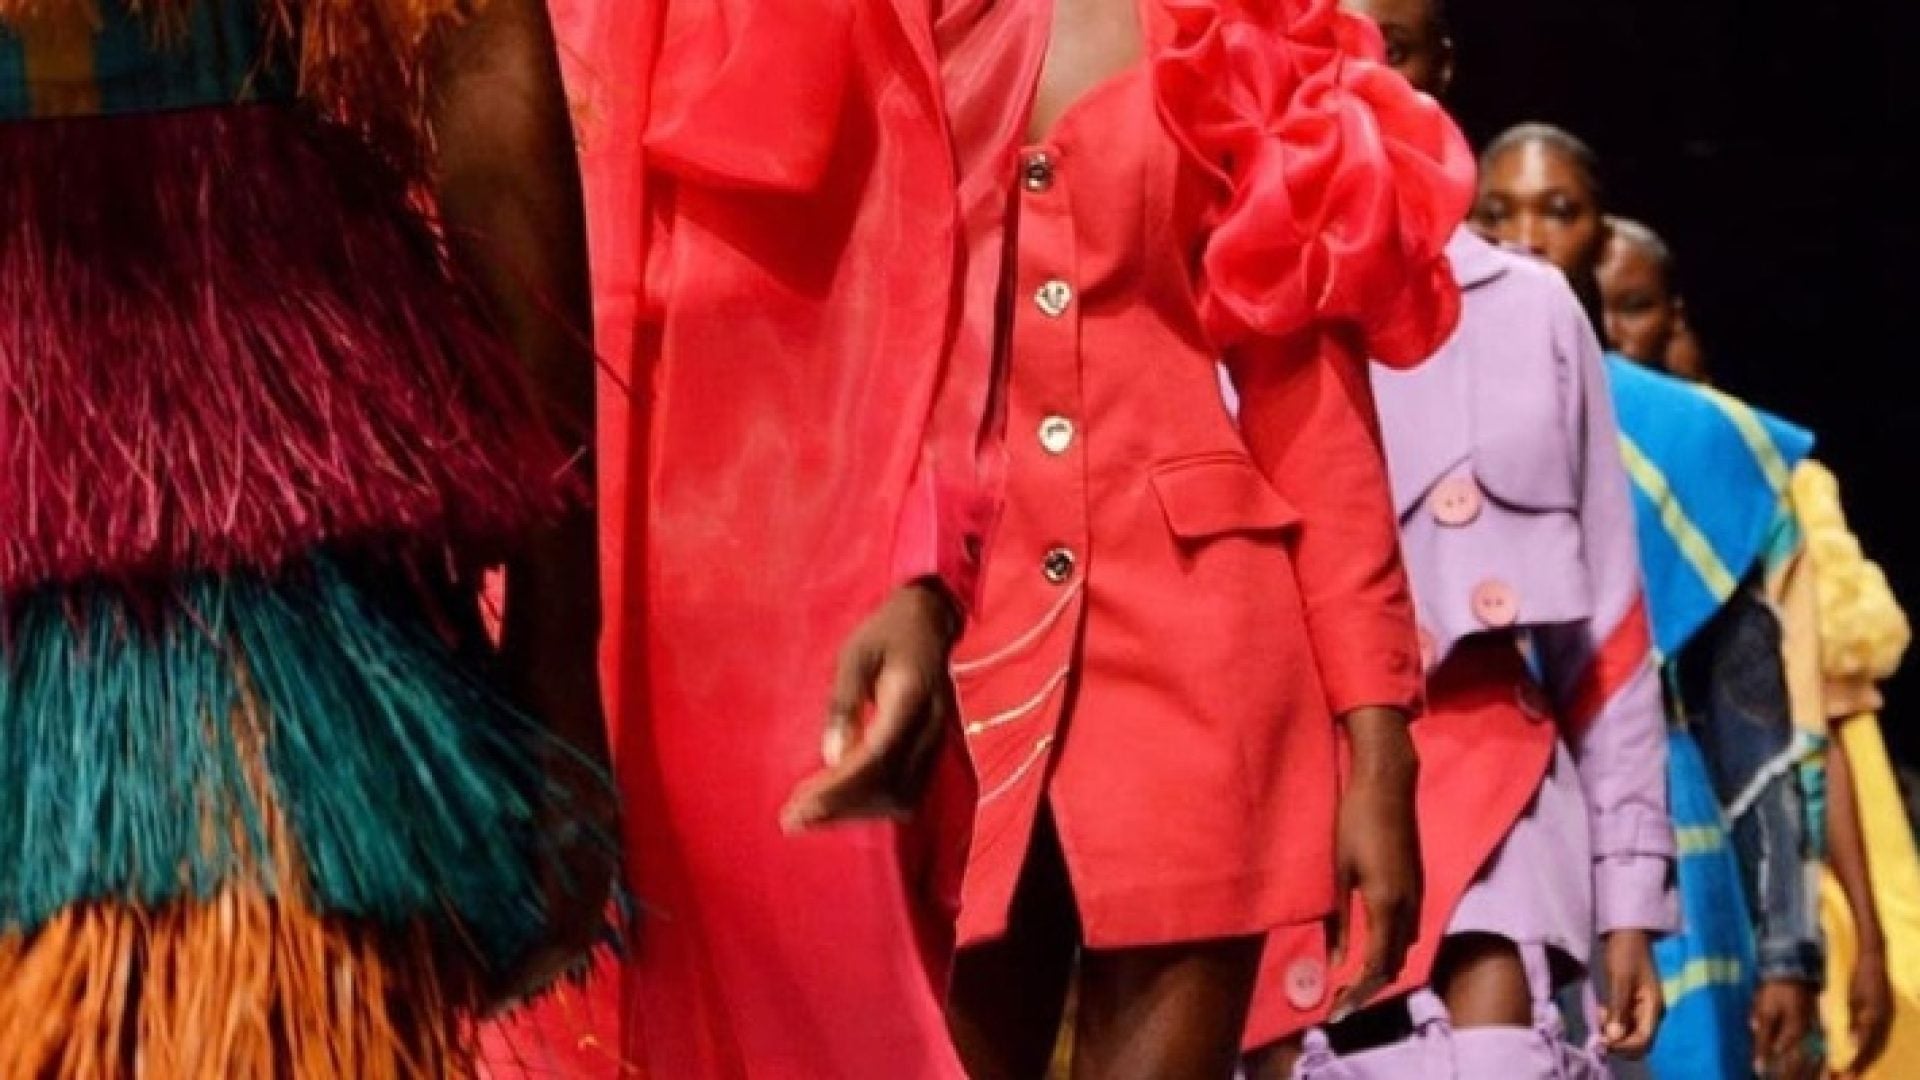 Lagos Fashion Week Was Bustling With Womenswear Galore, And ESSENCE Got An Exclusive Peek